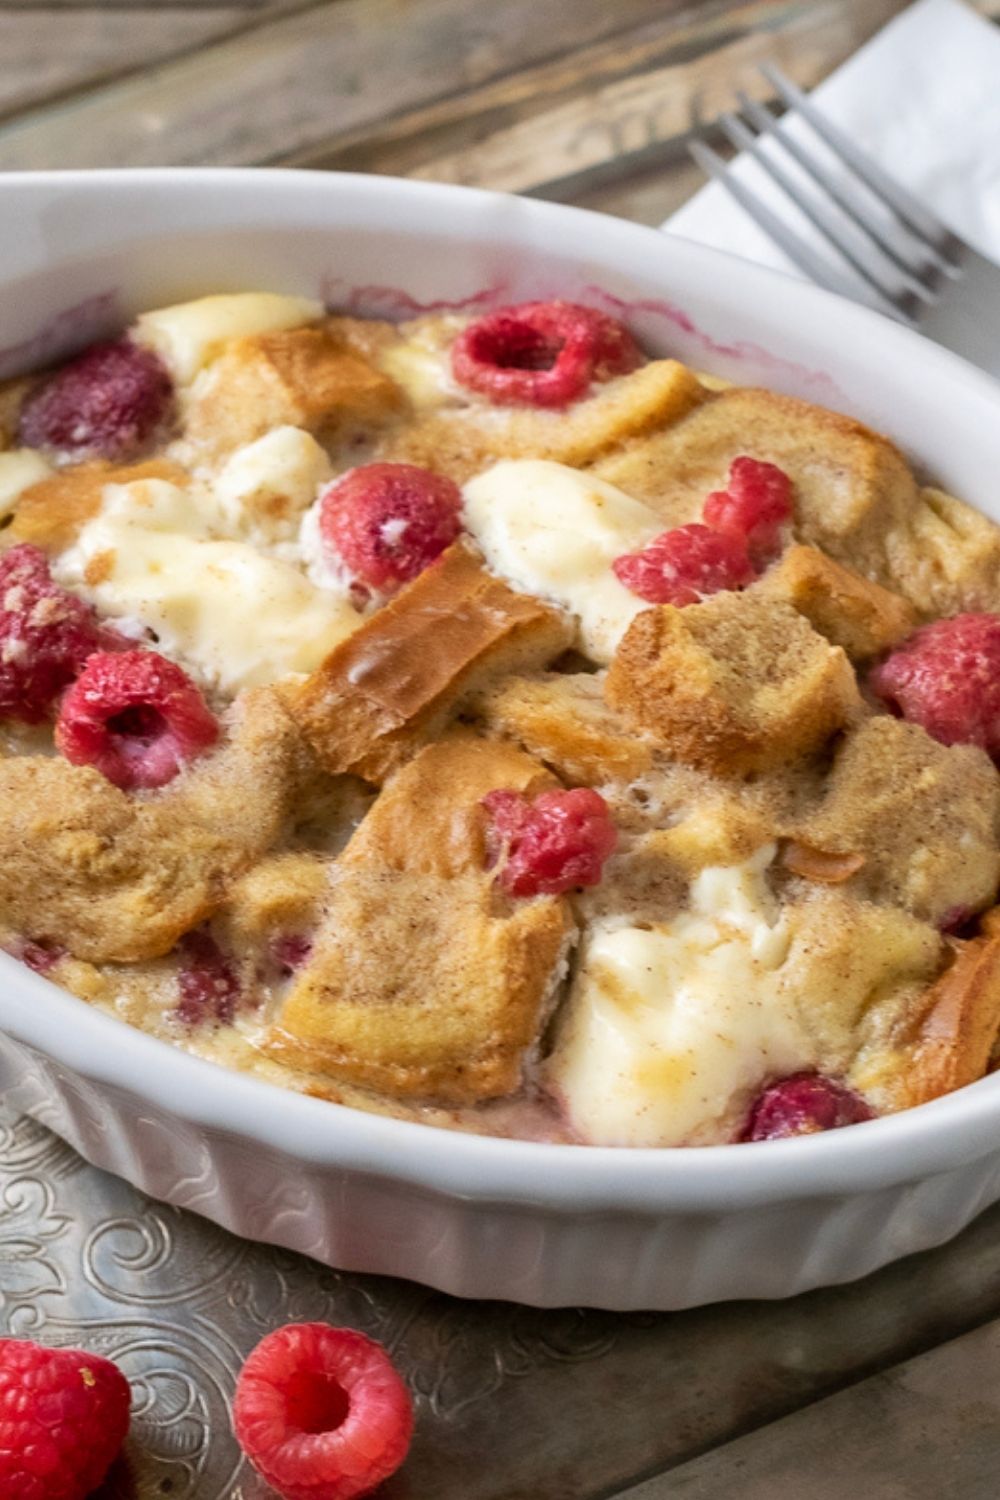 Raspberry Cream Cheese French Toast Casserole in a baking dish.